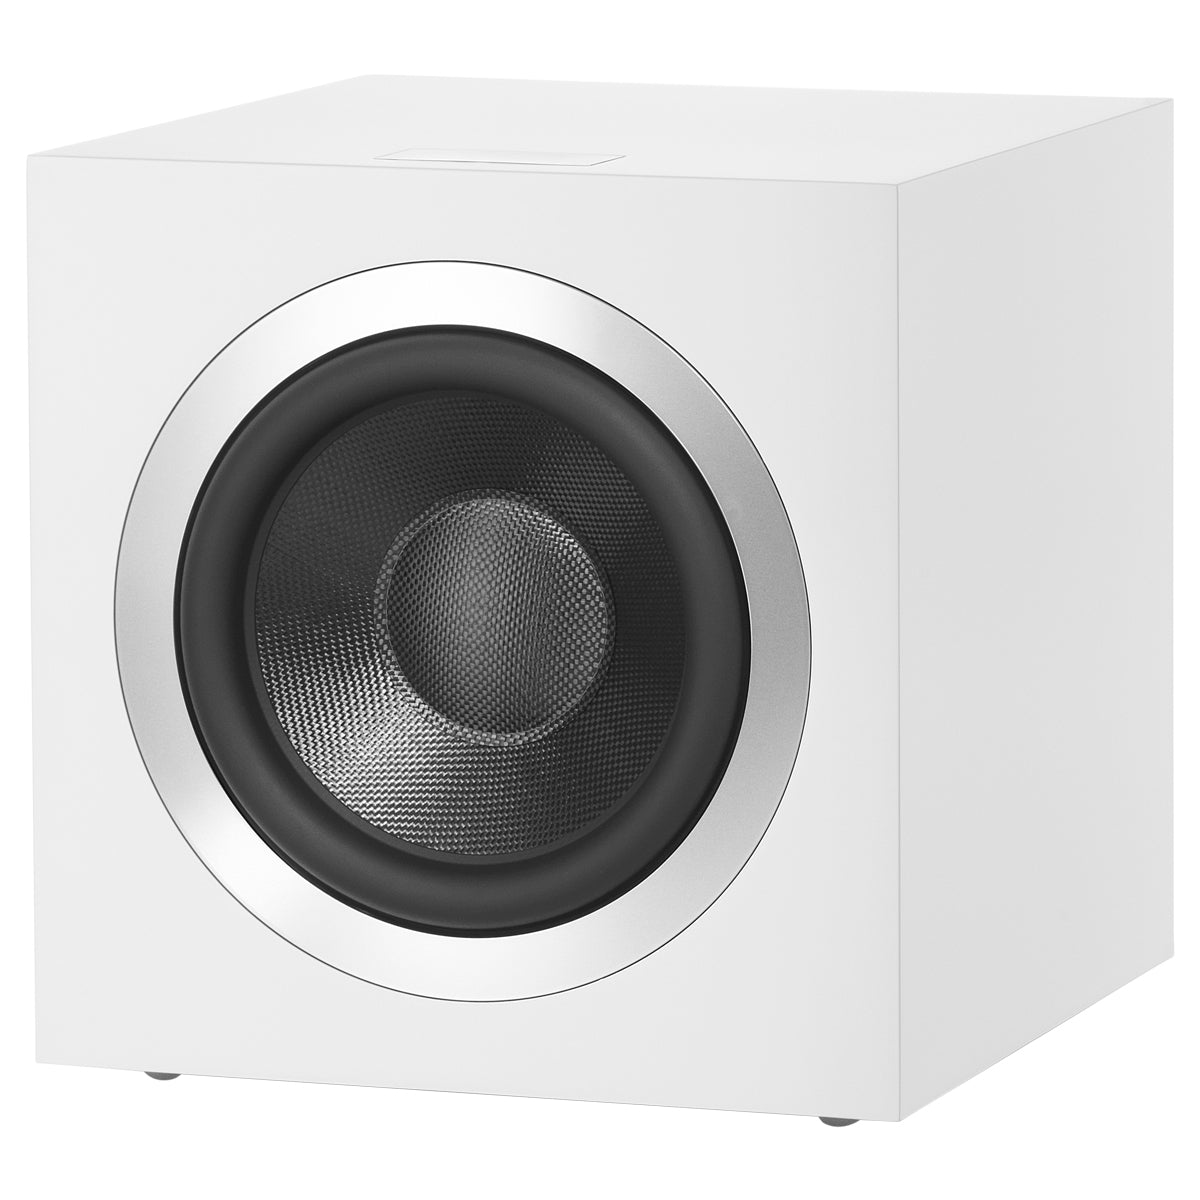 Bowers & Wilkins DB4S 10" Active Subwoofer - Satin White with Grey Grille - The Audio Experts